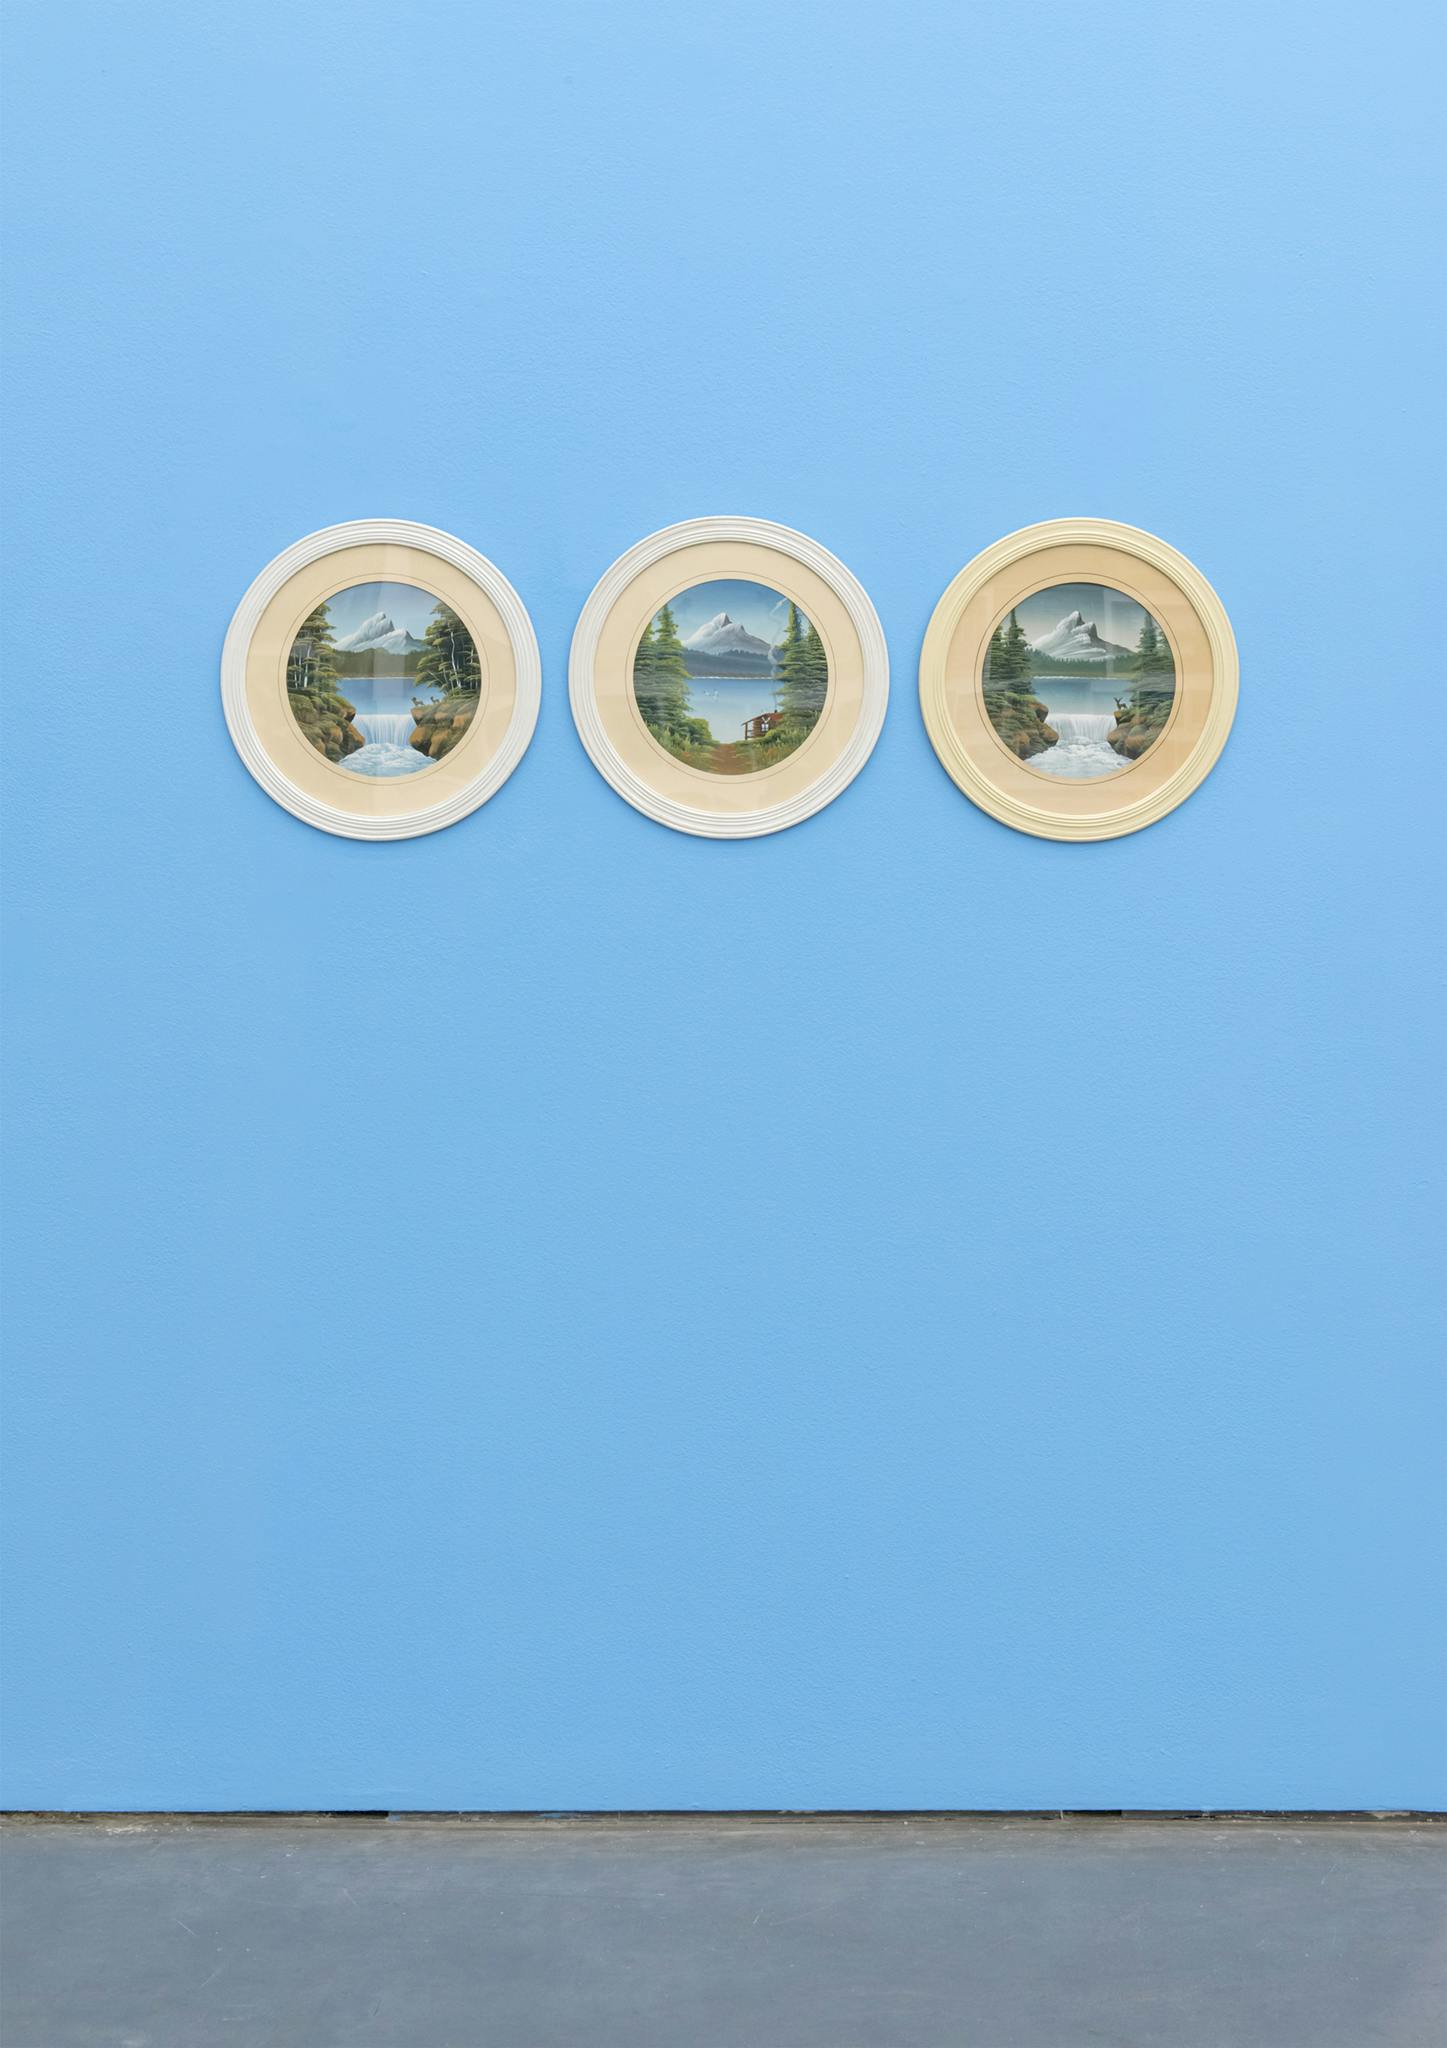 Three circular paintings of mountain landscapes hang in a horizontal line on a bright blue wall in a gallery. The landscapes appear to be duplicates but are subtly different.